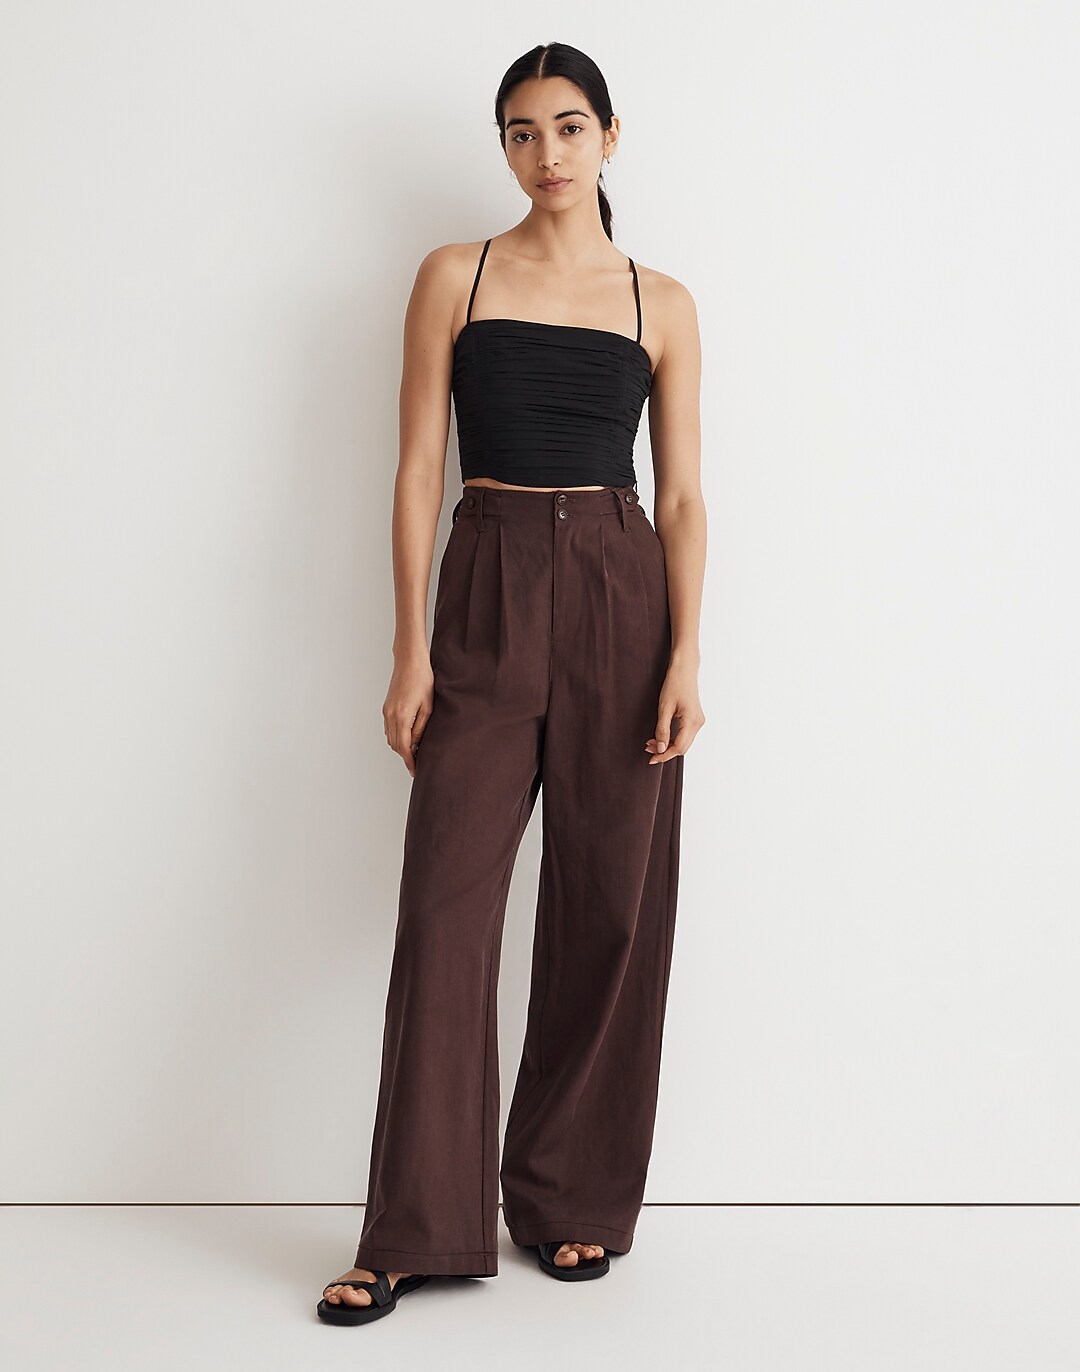 The Taron High Waist Wide Leg Pants in Pear • Impressions Online